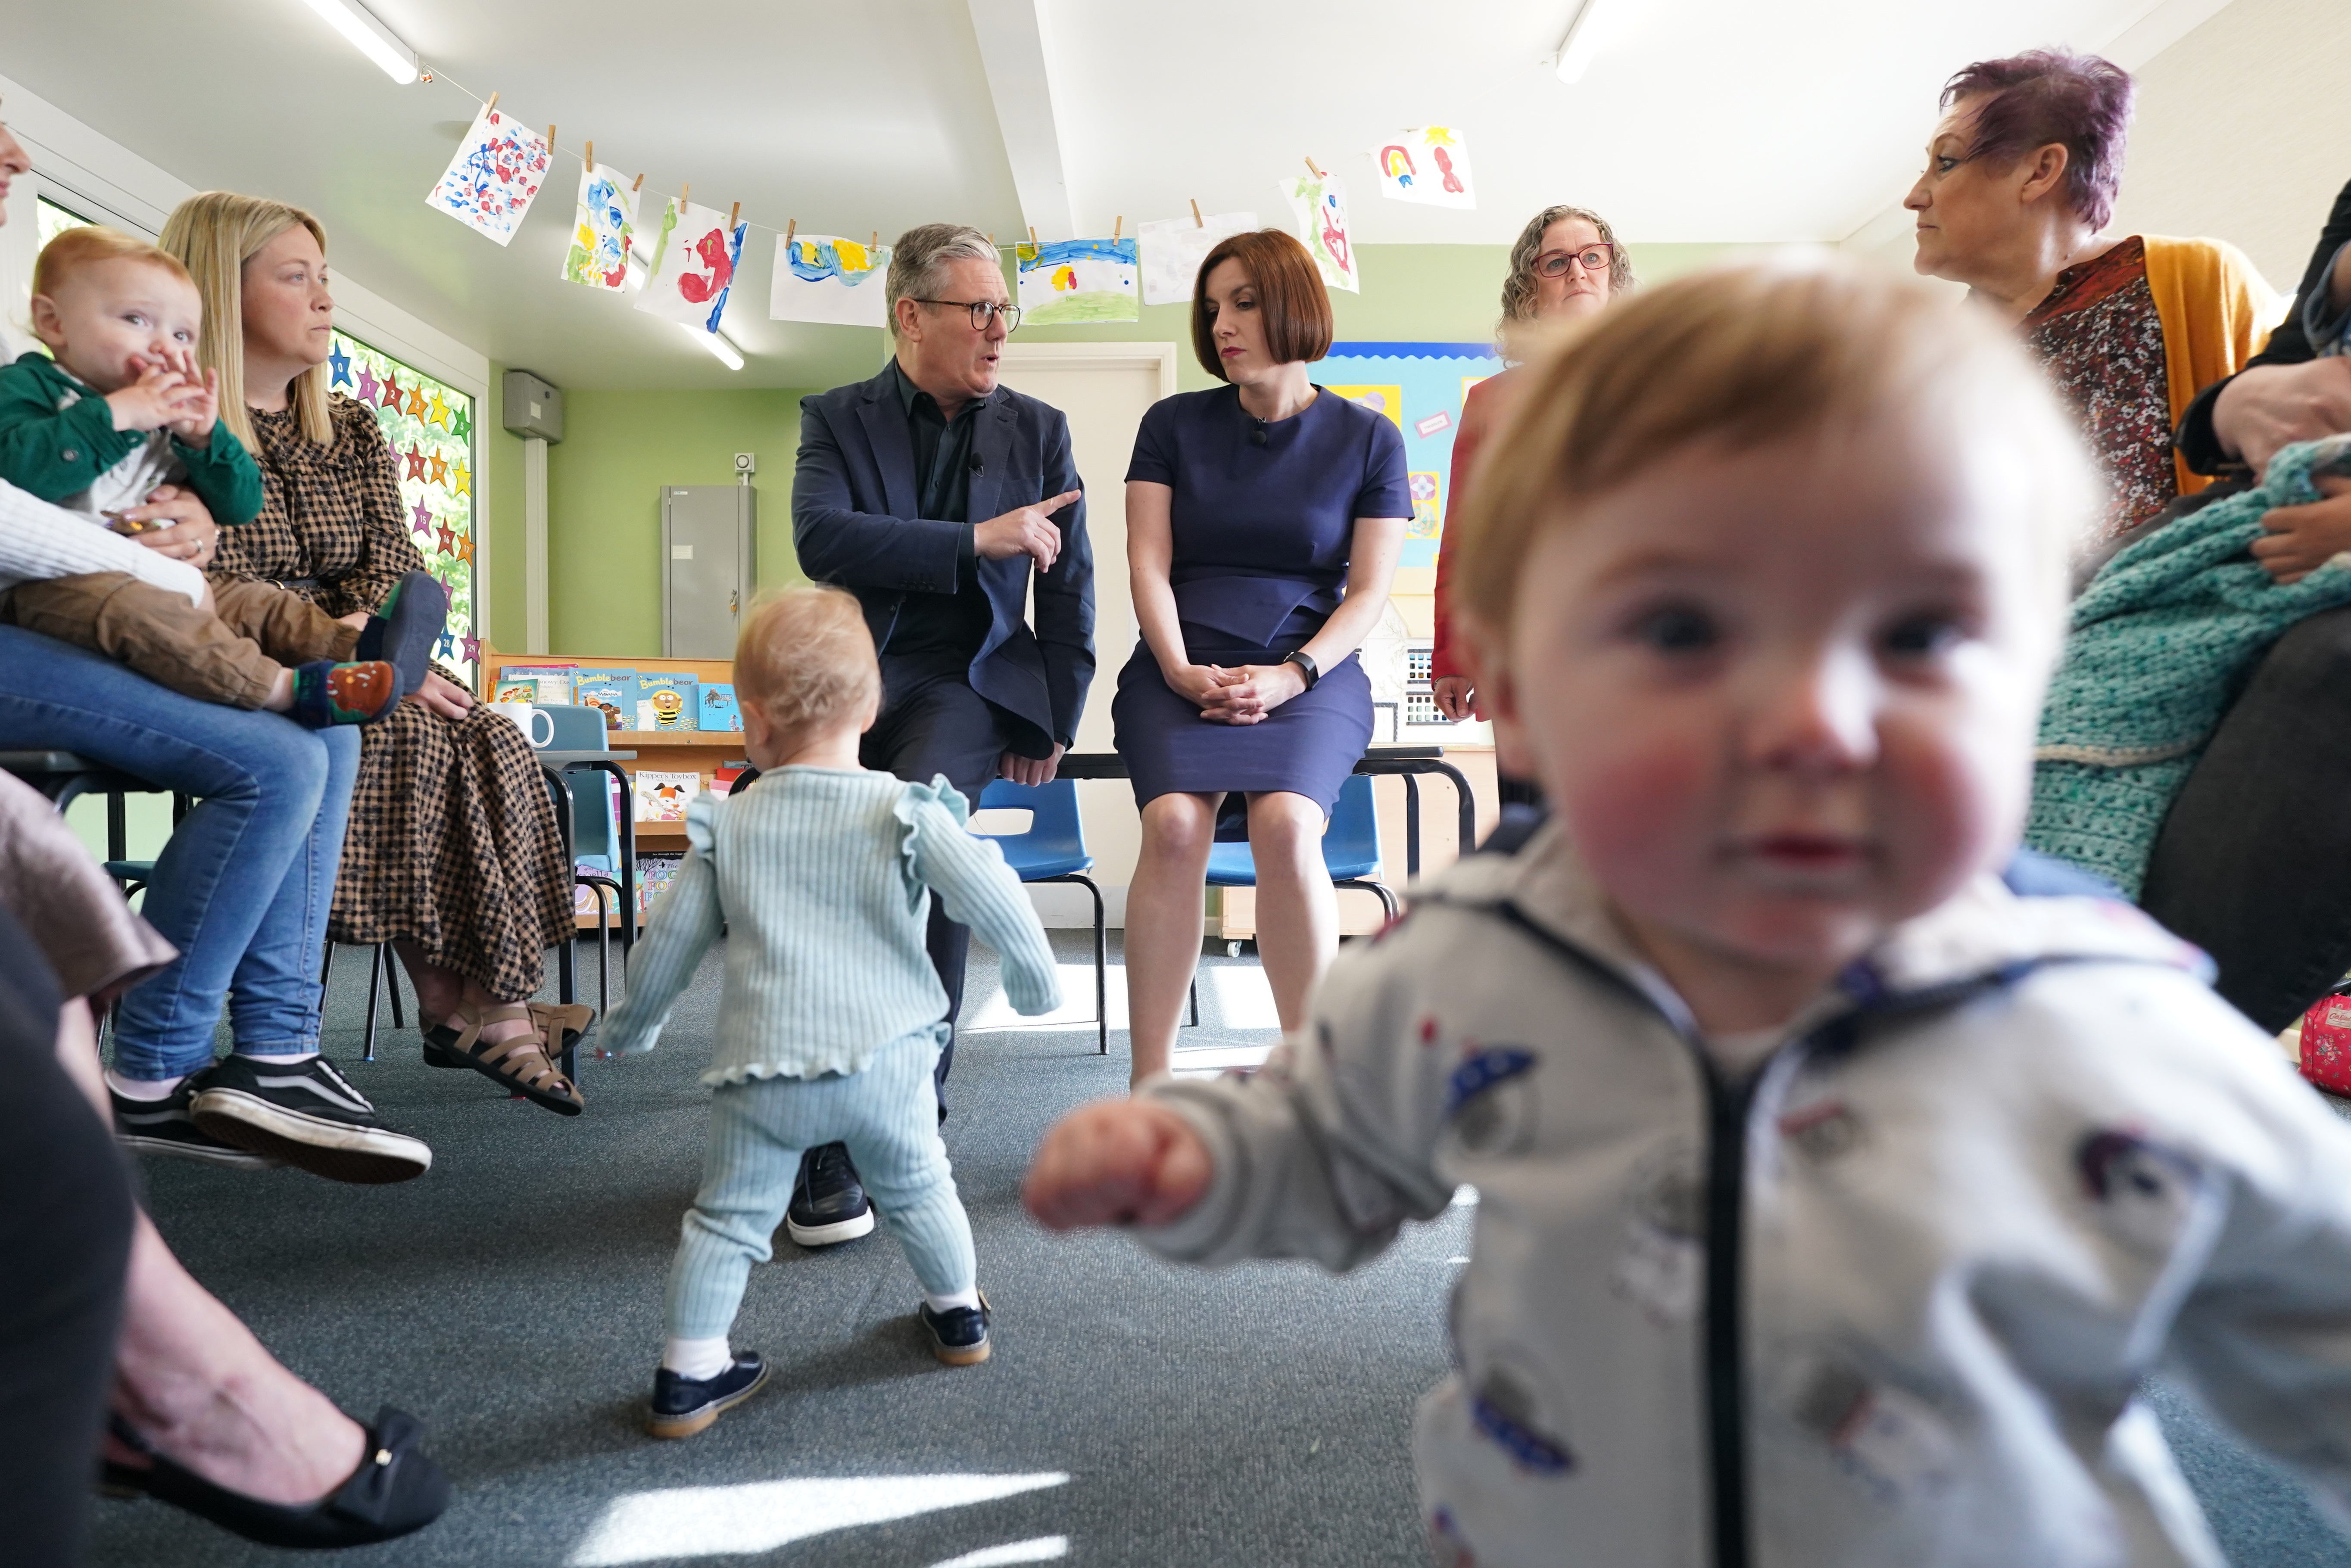 Sir Keir and shadow education secretary Bridget Phillipson were photo-bombed as they met future voters during a visit to Nursery Hill Primary School, in Nuneaton (Stefan Rousseau/PA)